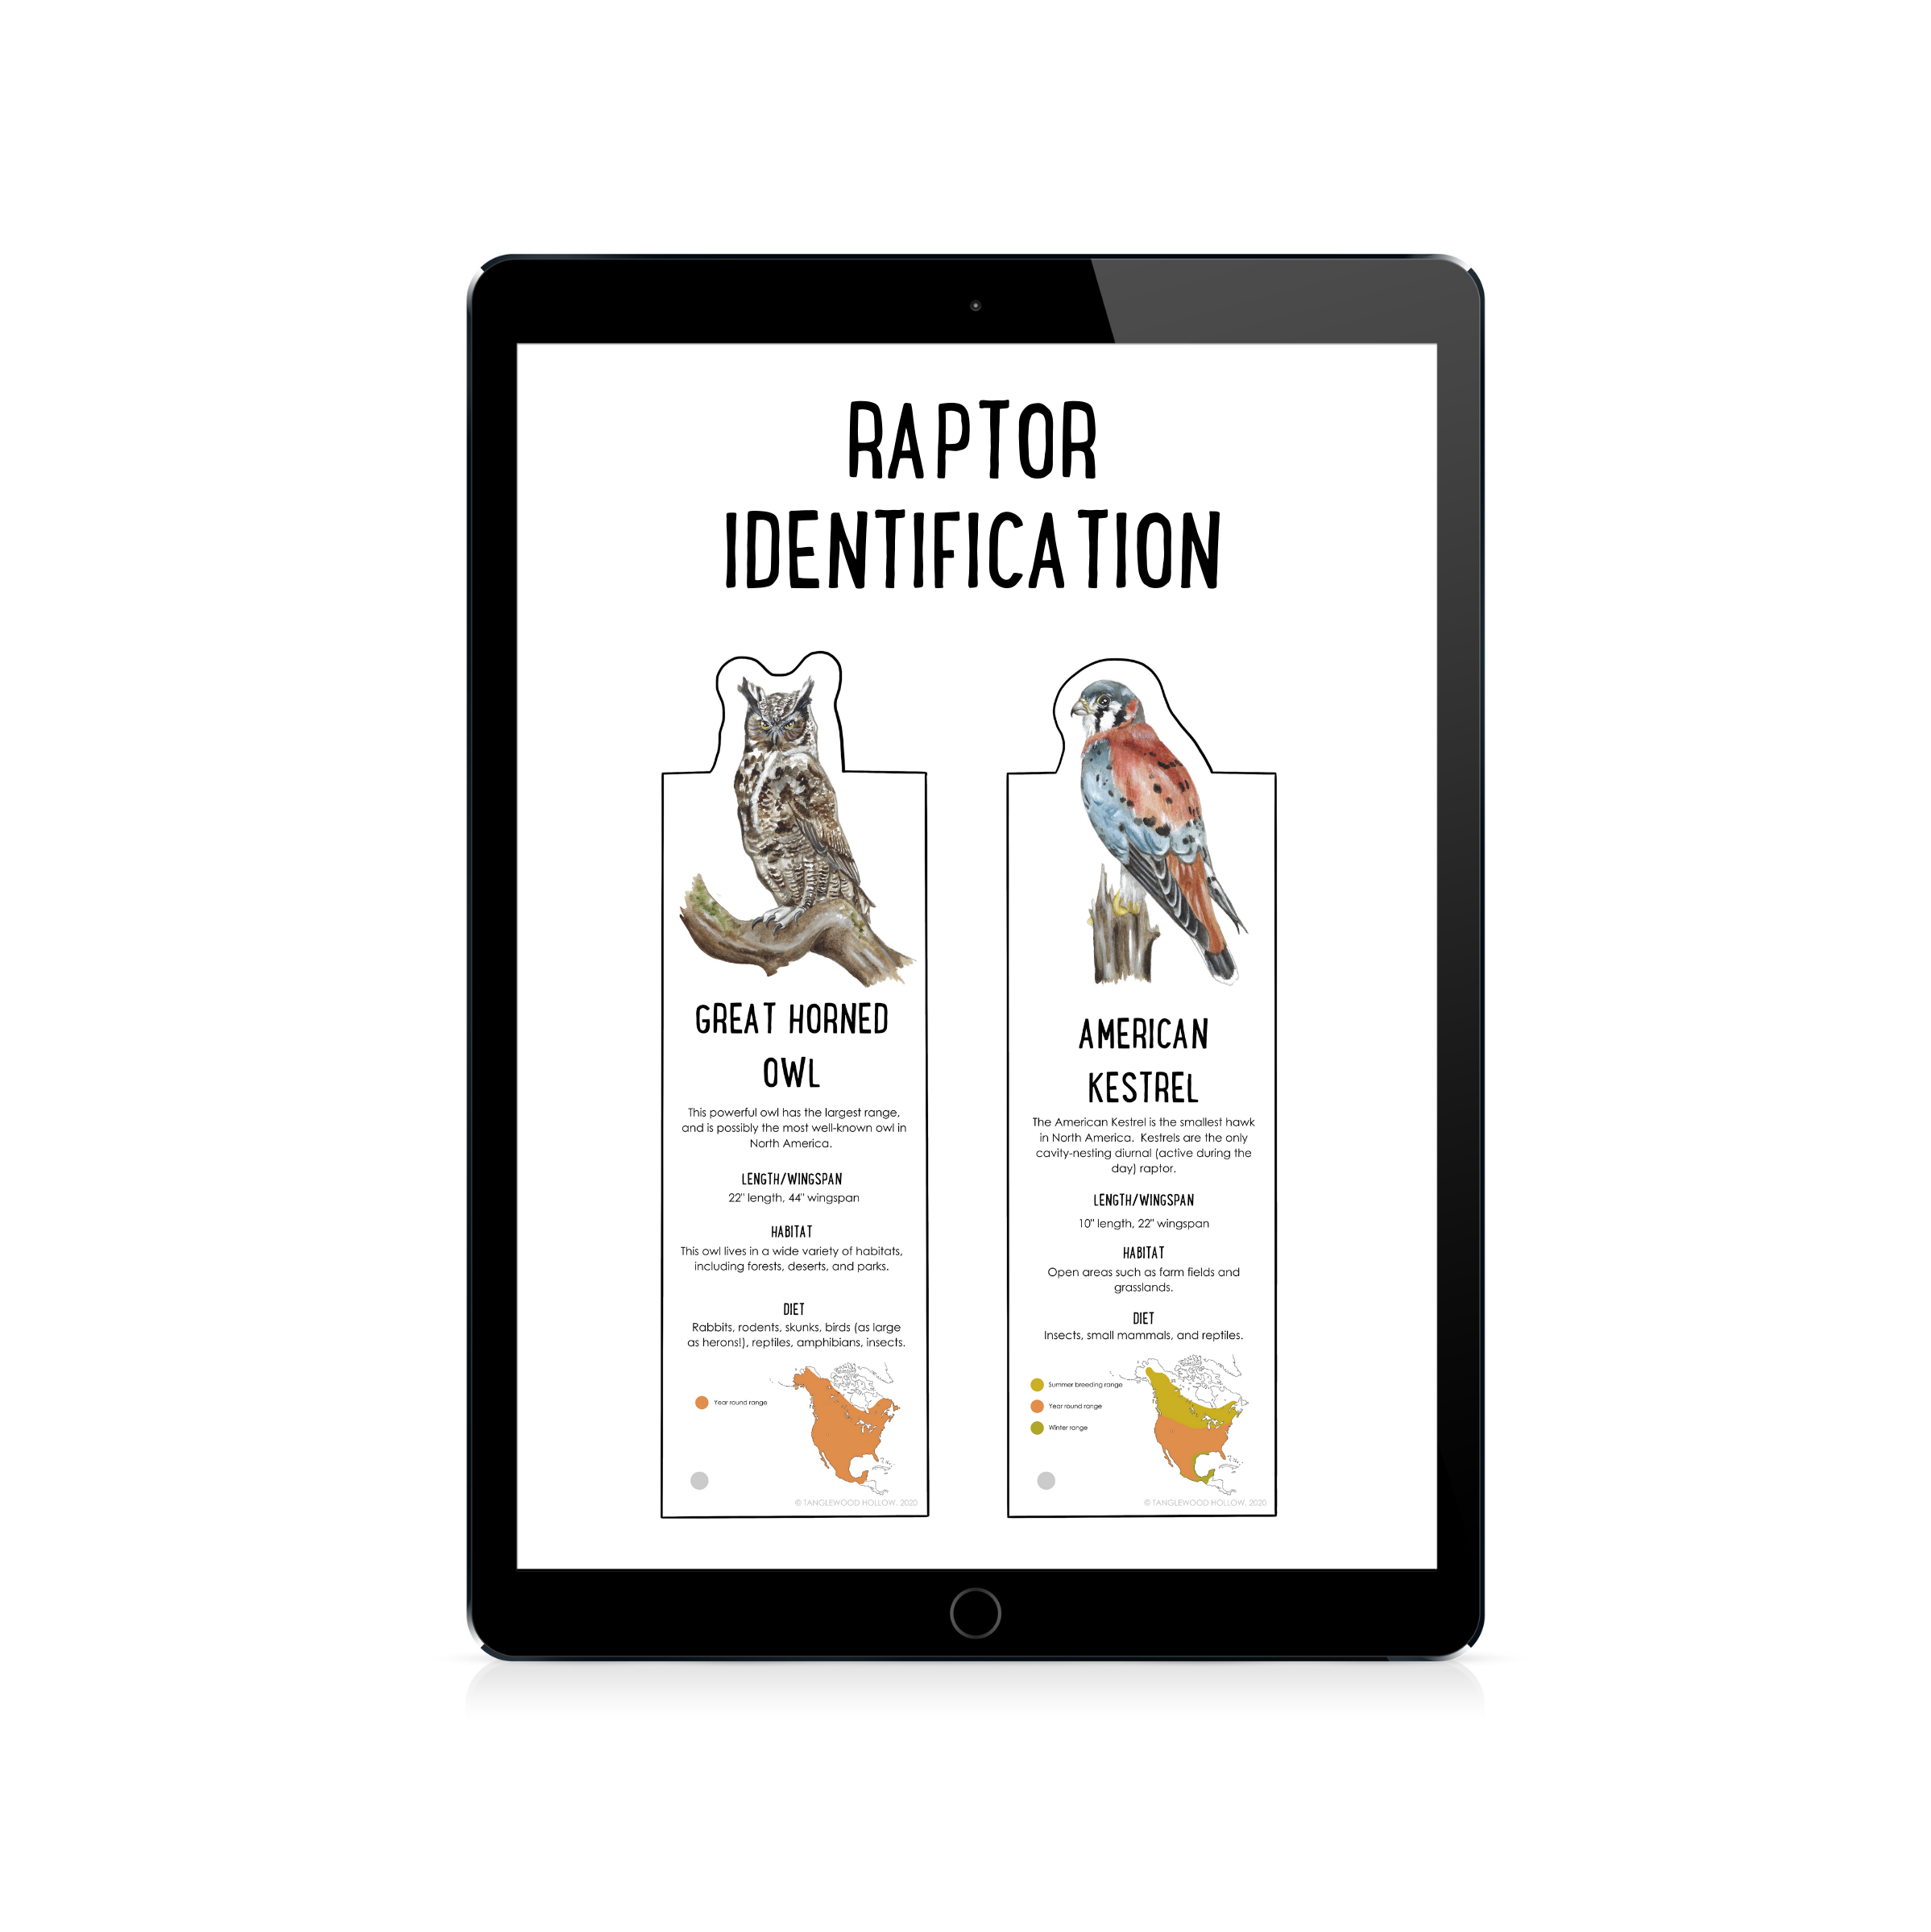 Printable Raptor Identification Cards and Poster